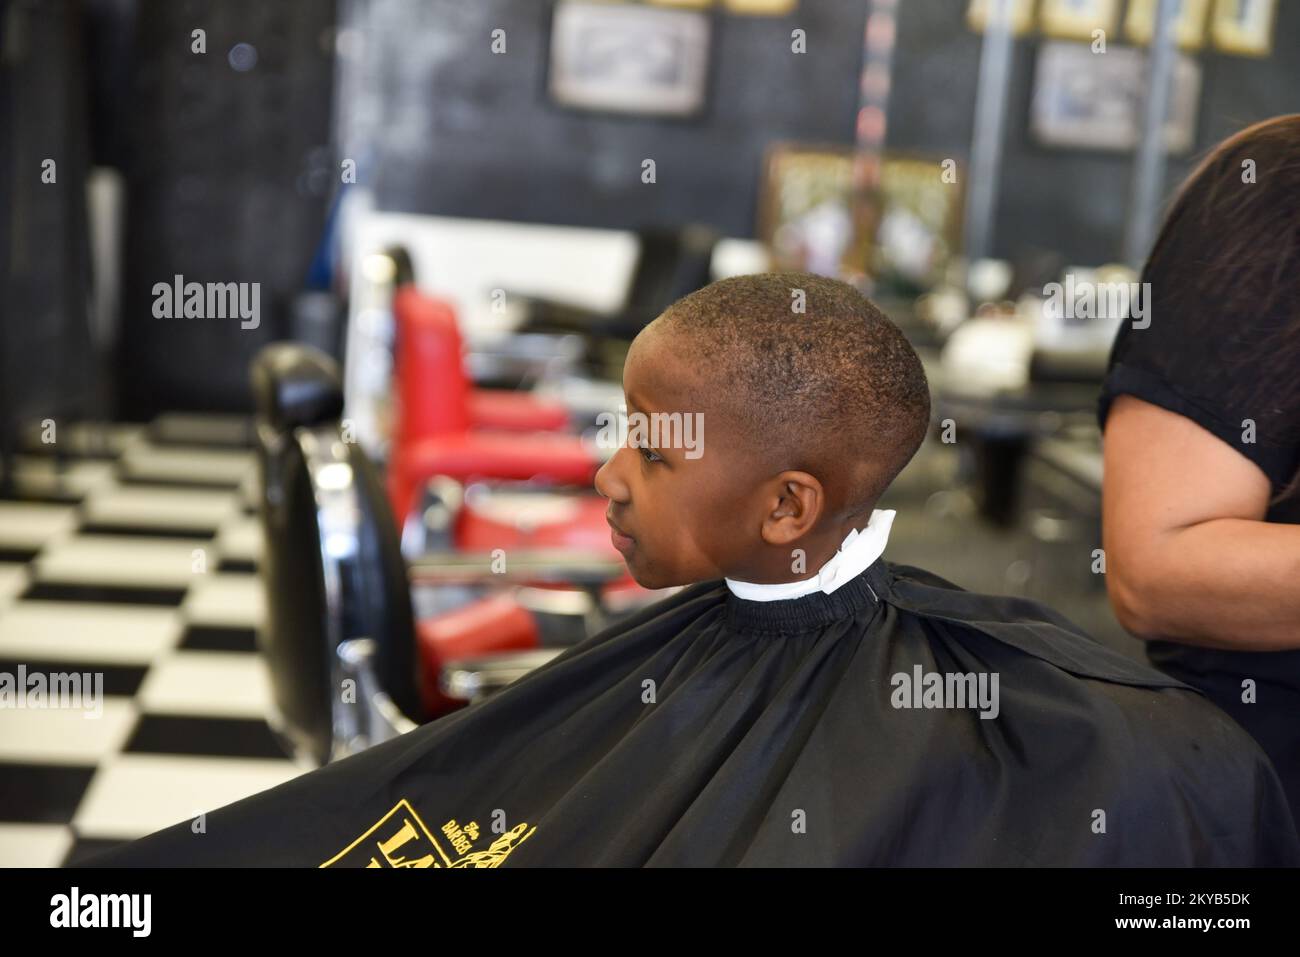 young black kid with a newly fresh faded haircut style Stock Photo